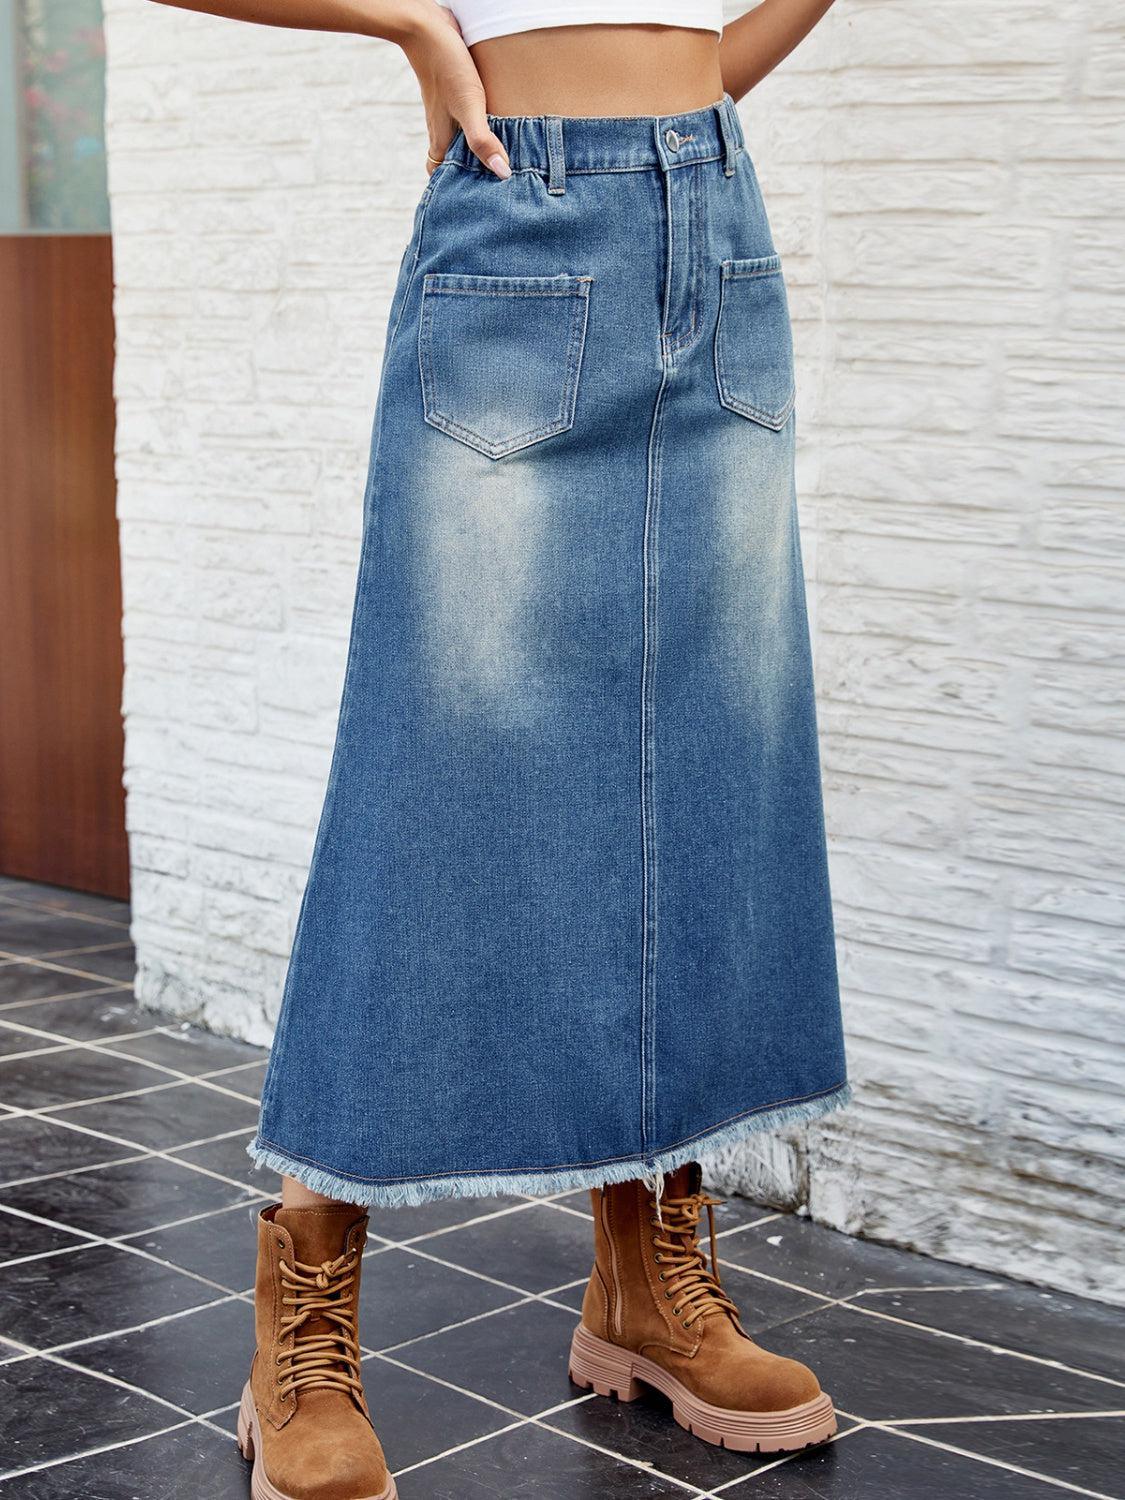 a woman in a white top and a denim skirt